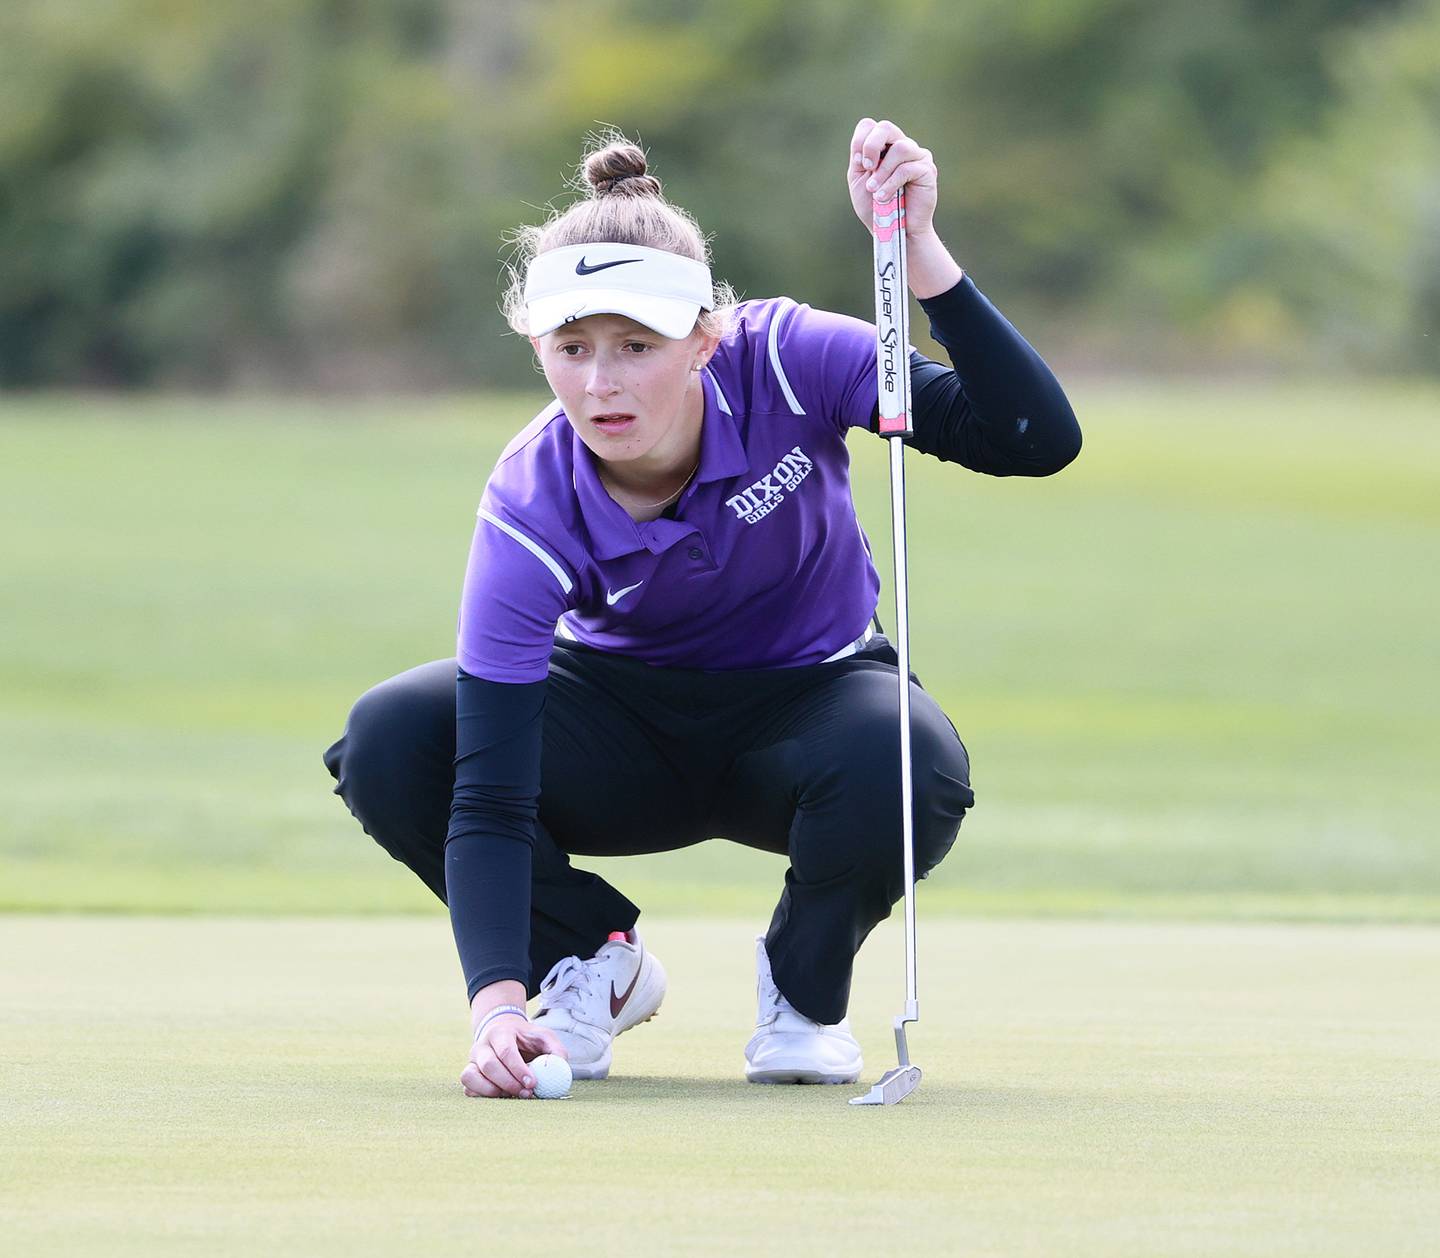 Dixon junior Katie Drew lines up a putt at the Class 1A State Tournament on Saturday, Oct. 8, 2022 at Red Tail Run Golf Course in Decatur. Drew tied for fifth with a two-day total of 4-over-par 148.